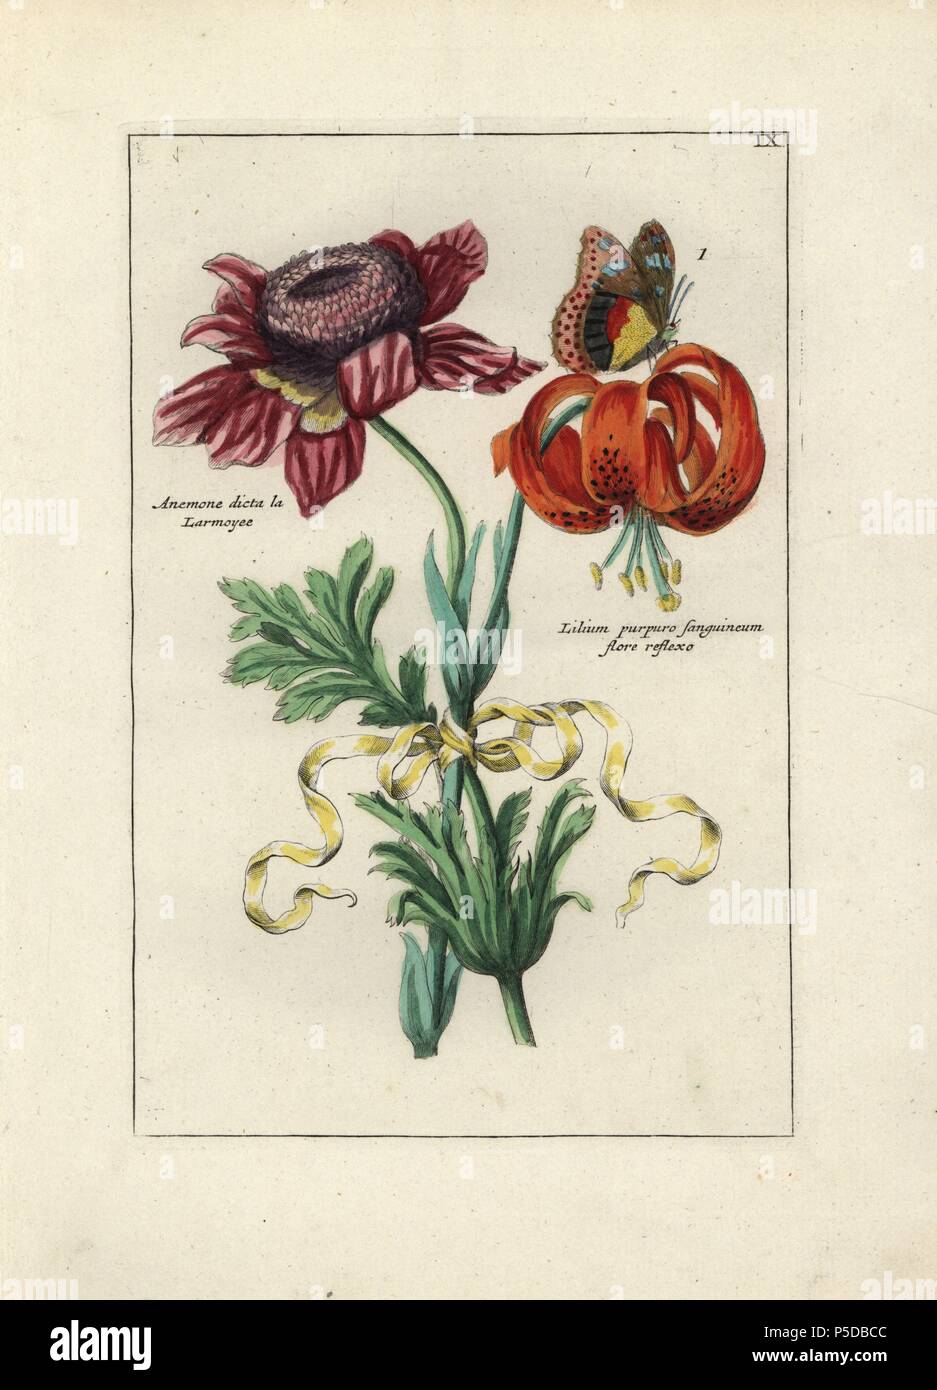 Lily, Lilium purpuro-sanguineum, and 'Larmoyee' anemone tied with a ribbon. Handcoloured copperplate botanical engraving from 'Nederlandsch Bloemwerk' (Dutch Flower Arrangements), Amsterdam, J.B. Elwe, 1794. Illustration copied from a work by one of the outstanding French flower painters of the 17th century, Nicolas Robert (1614-1685), entitled 'Variae ac multiformes florum species.. Diverses fleurs,' Paris, 1660. Stock Photo